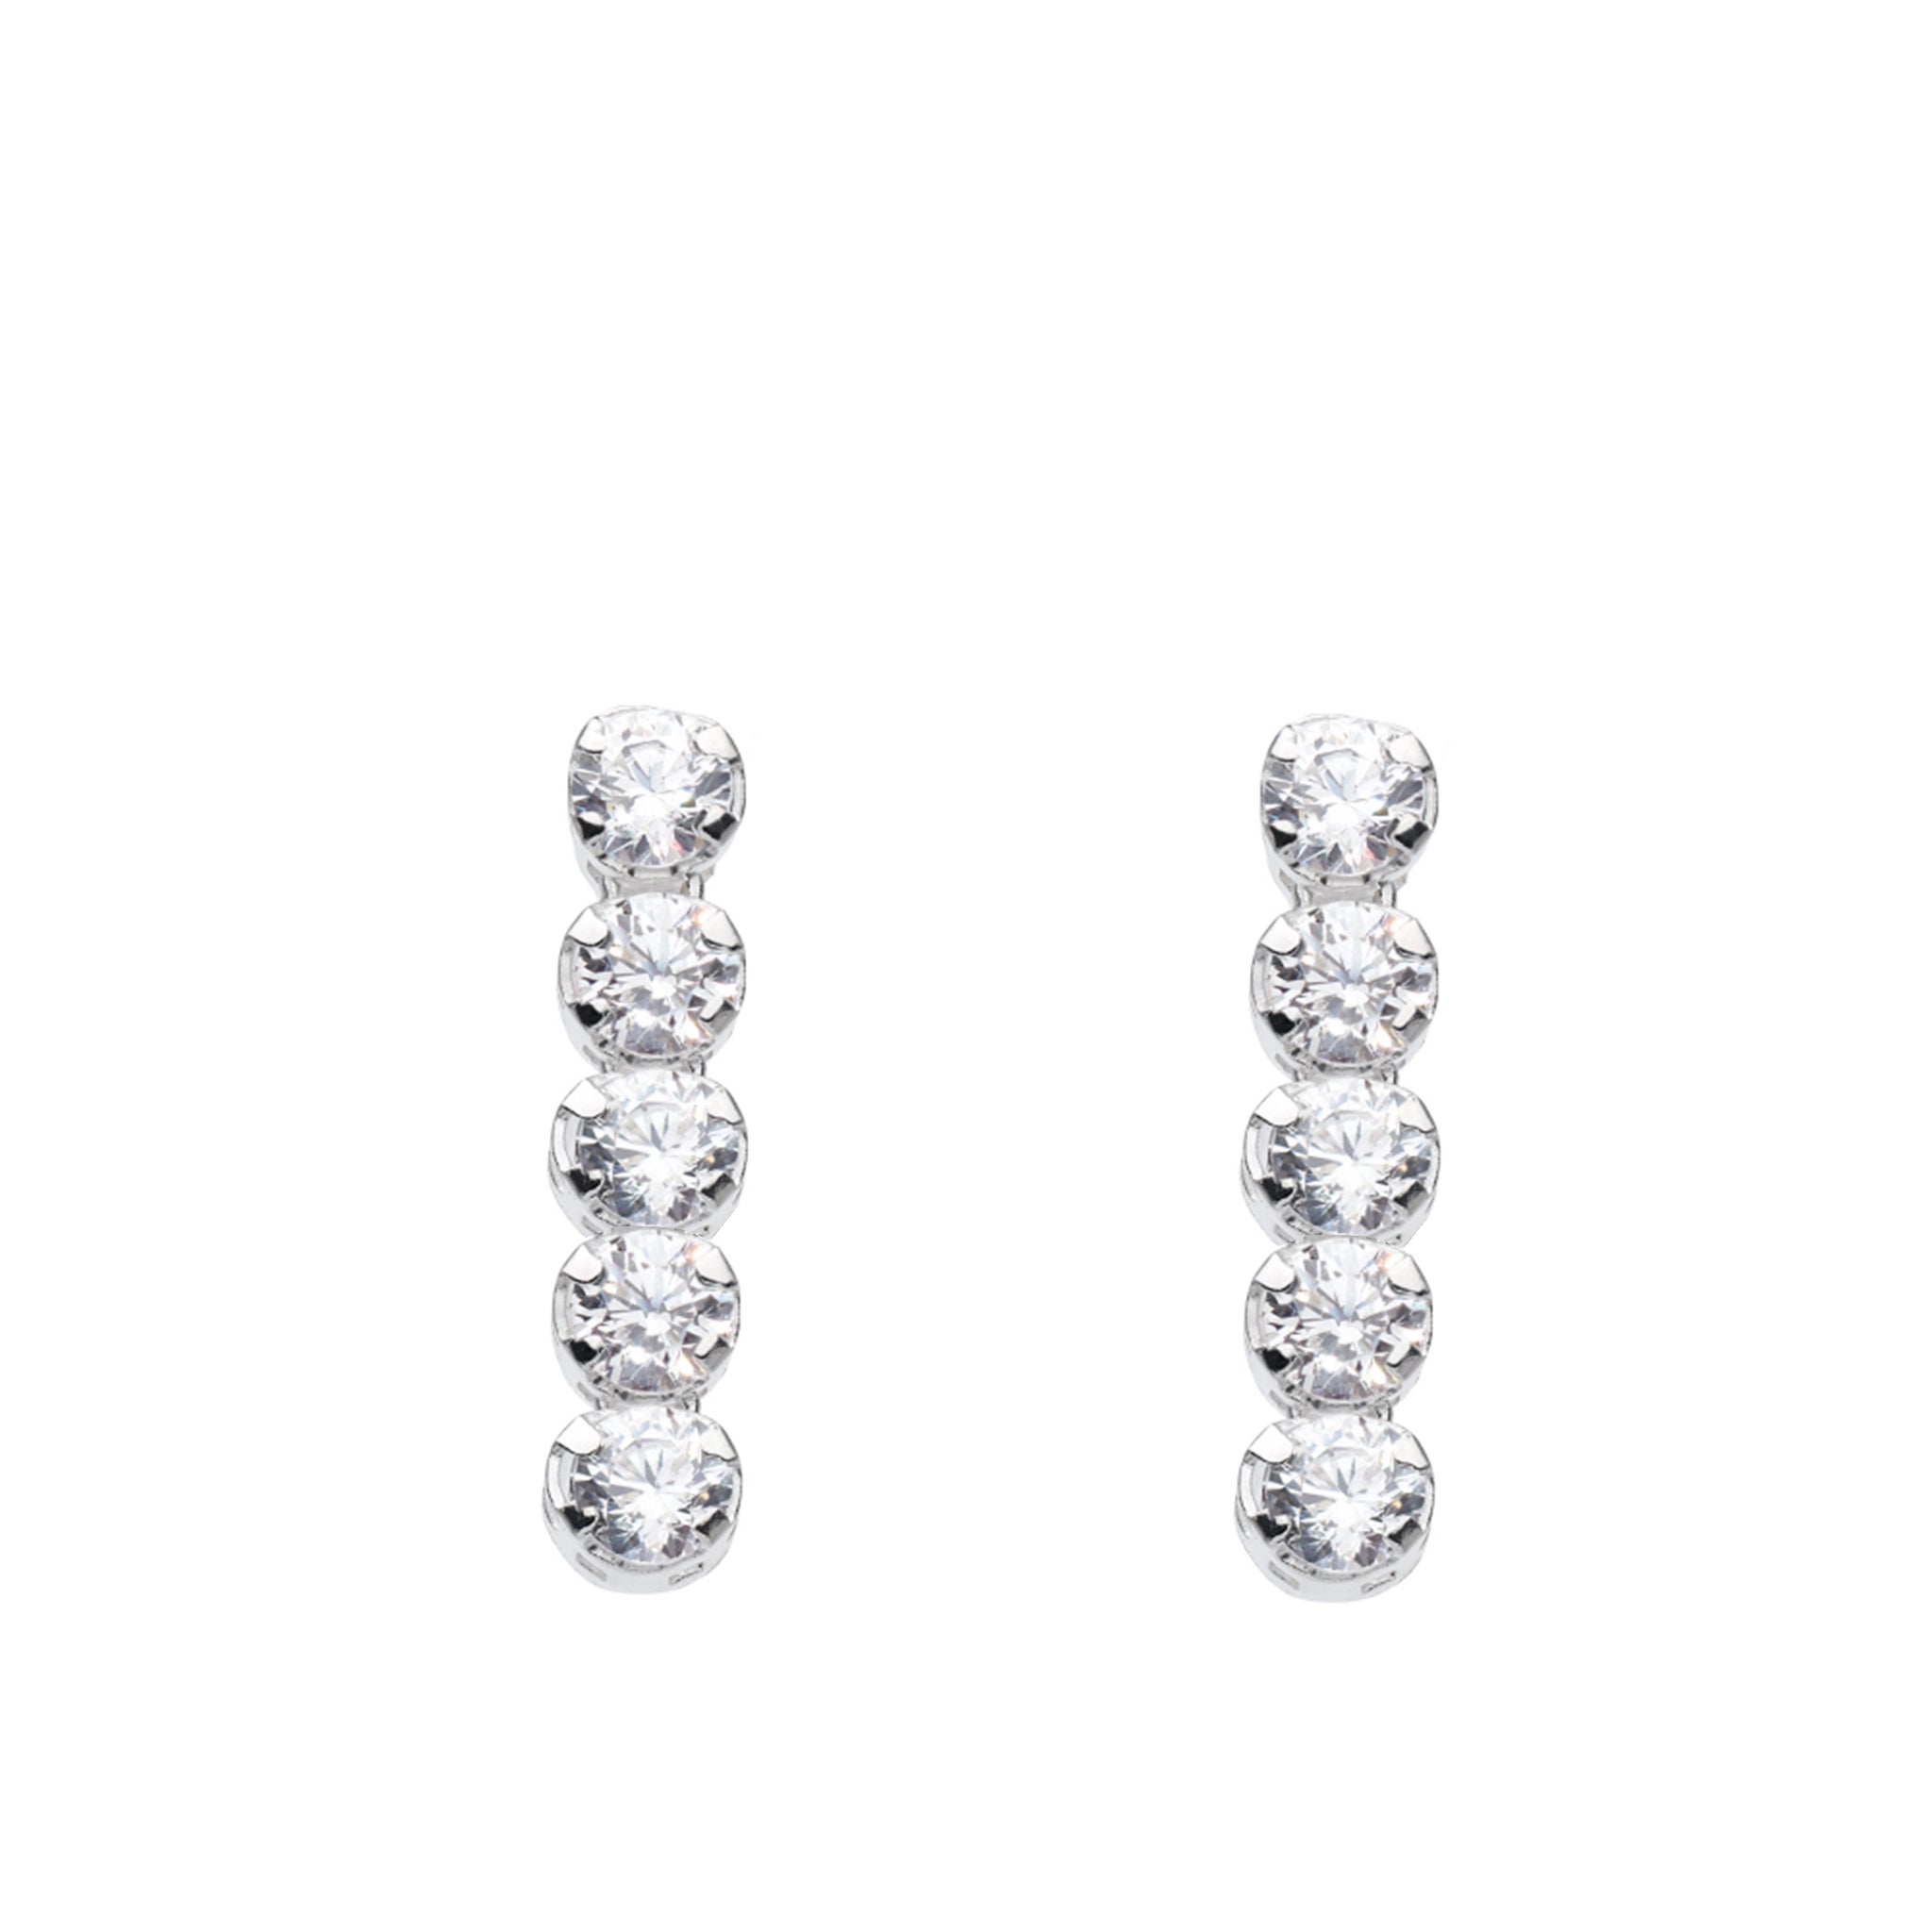 A pair of stud earrings with five stacked CZ solitaire stones